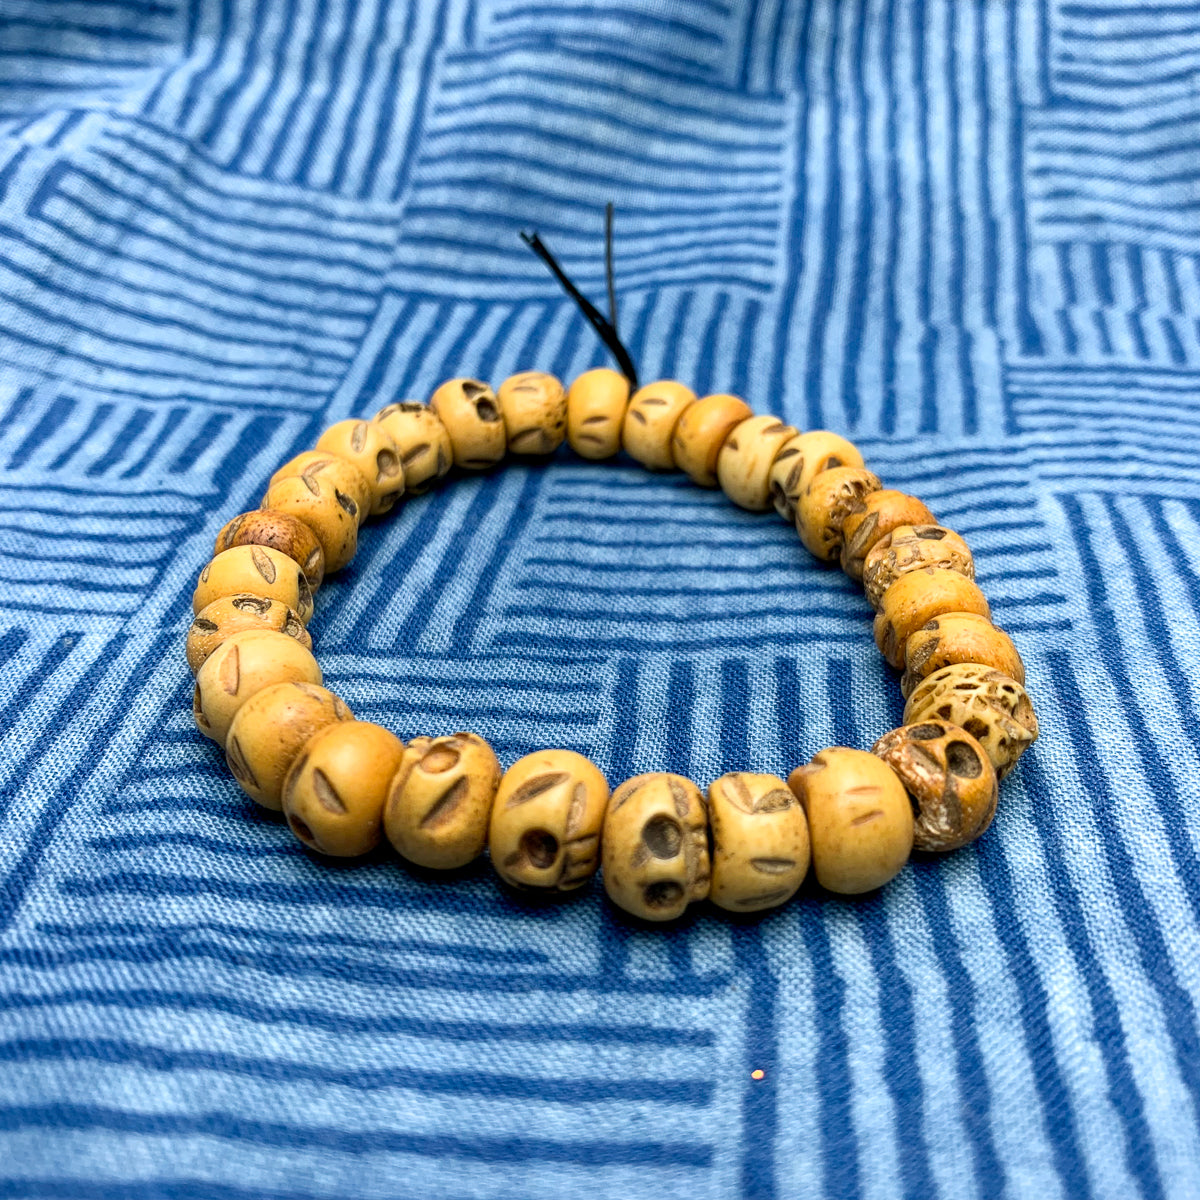 Detail Carved Natural Olive Pit Skull Beads Bracelet -C032012 - 3JADE  wholesale of jade carvings, jewelry, collectables, prayer beads